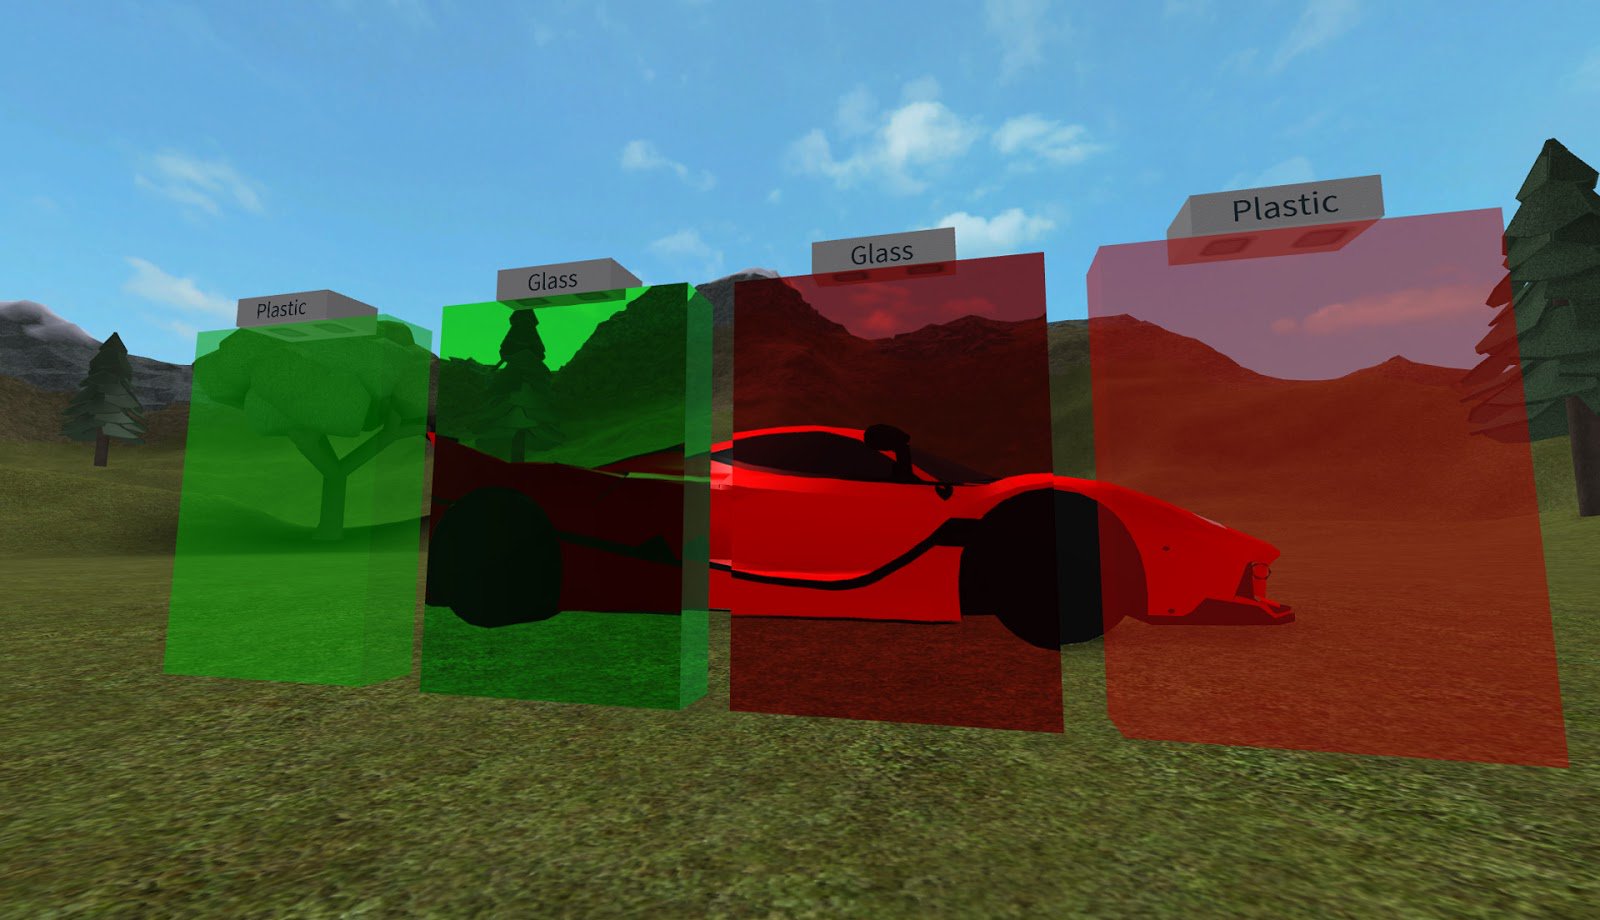 Roblox On Twitter In 2013 We Debuted Textures Like Grass Ice And Granite To Studio Since Then We Ve Added Exciting Options Like Neon And Glass That Allow Developers To Create Immersive And - neon red texture roblox